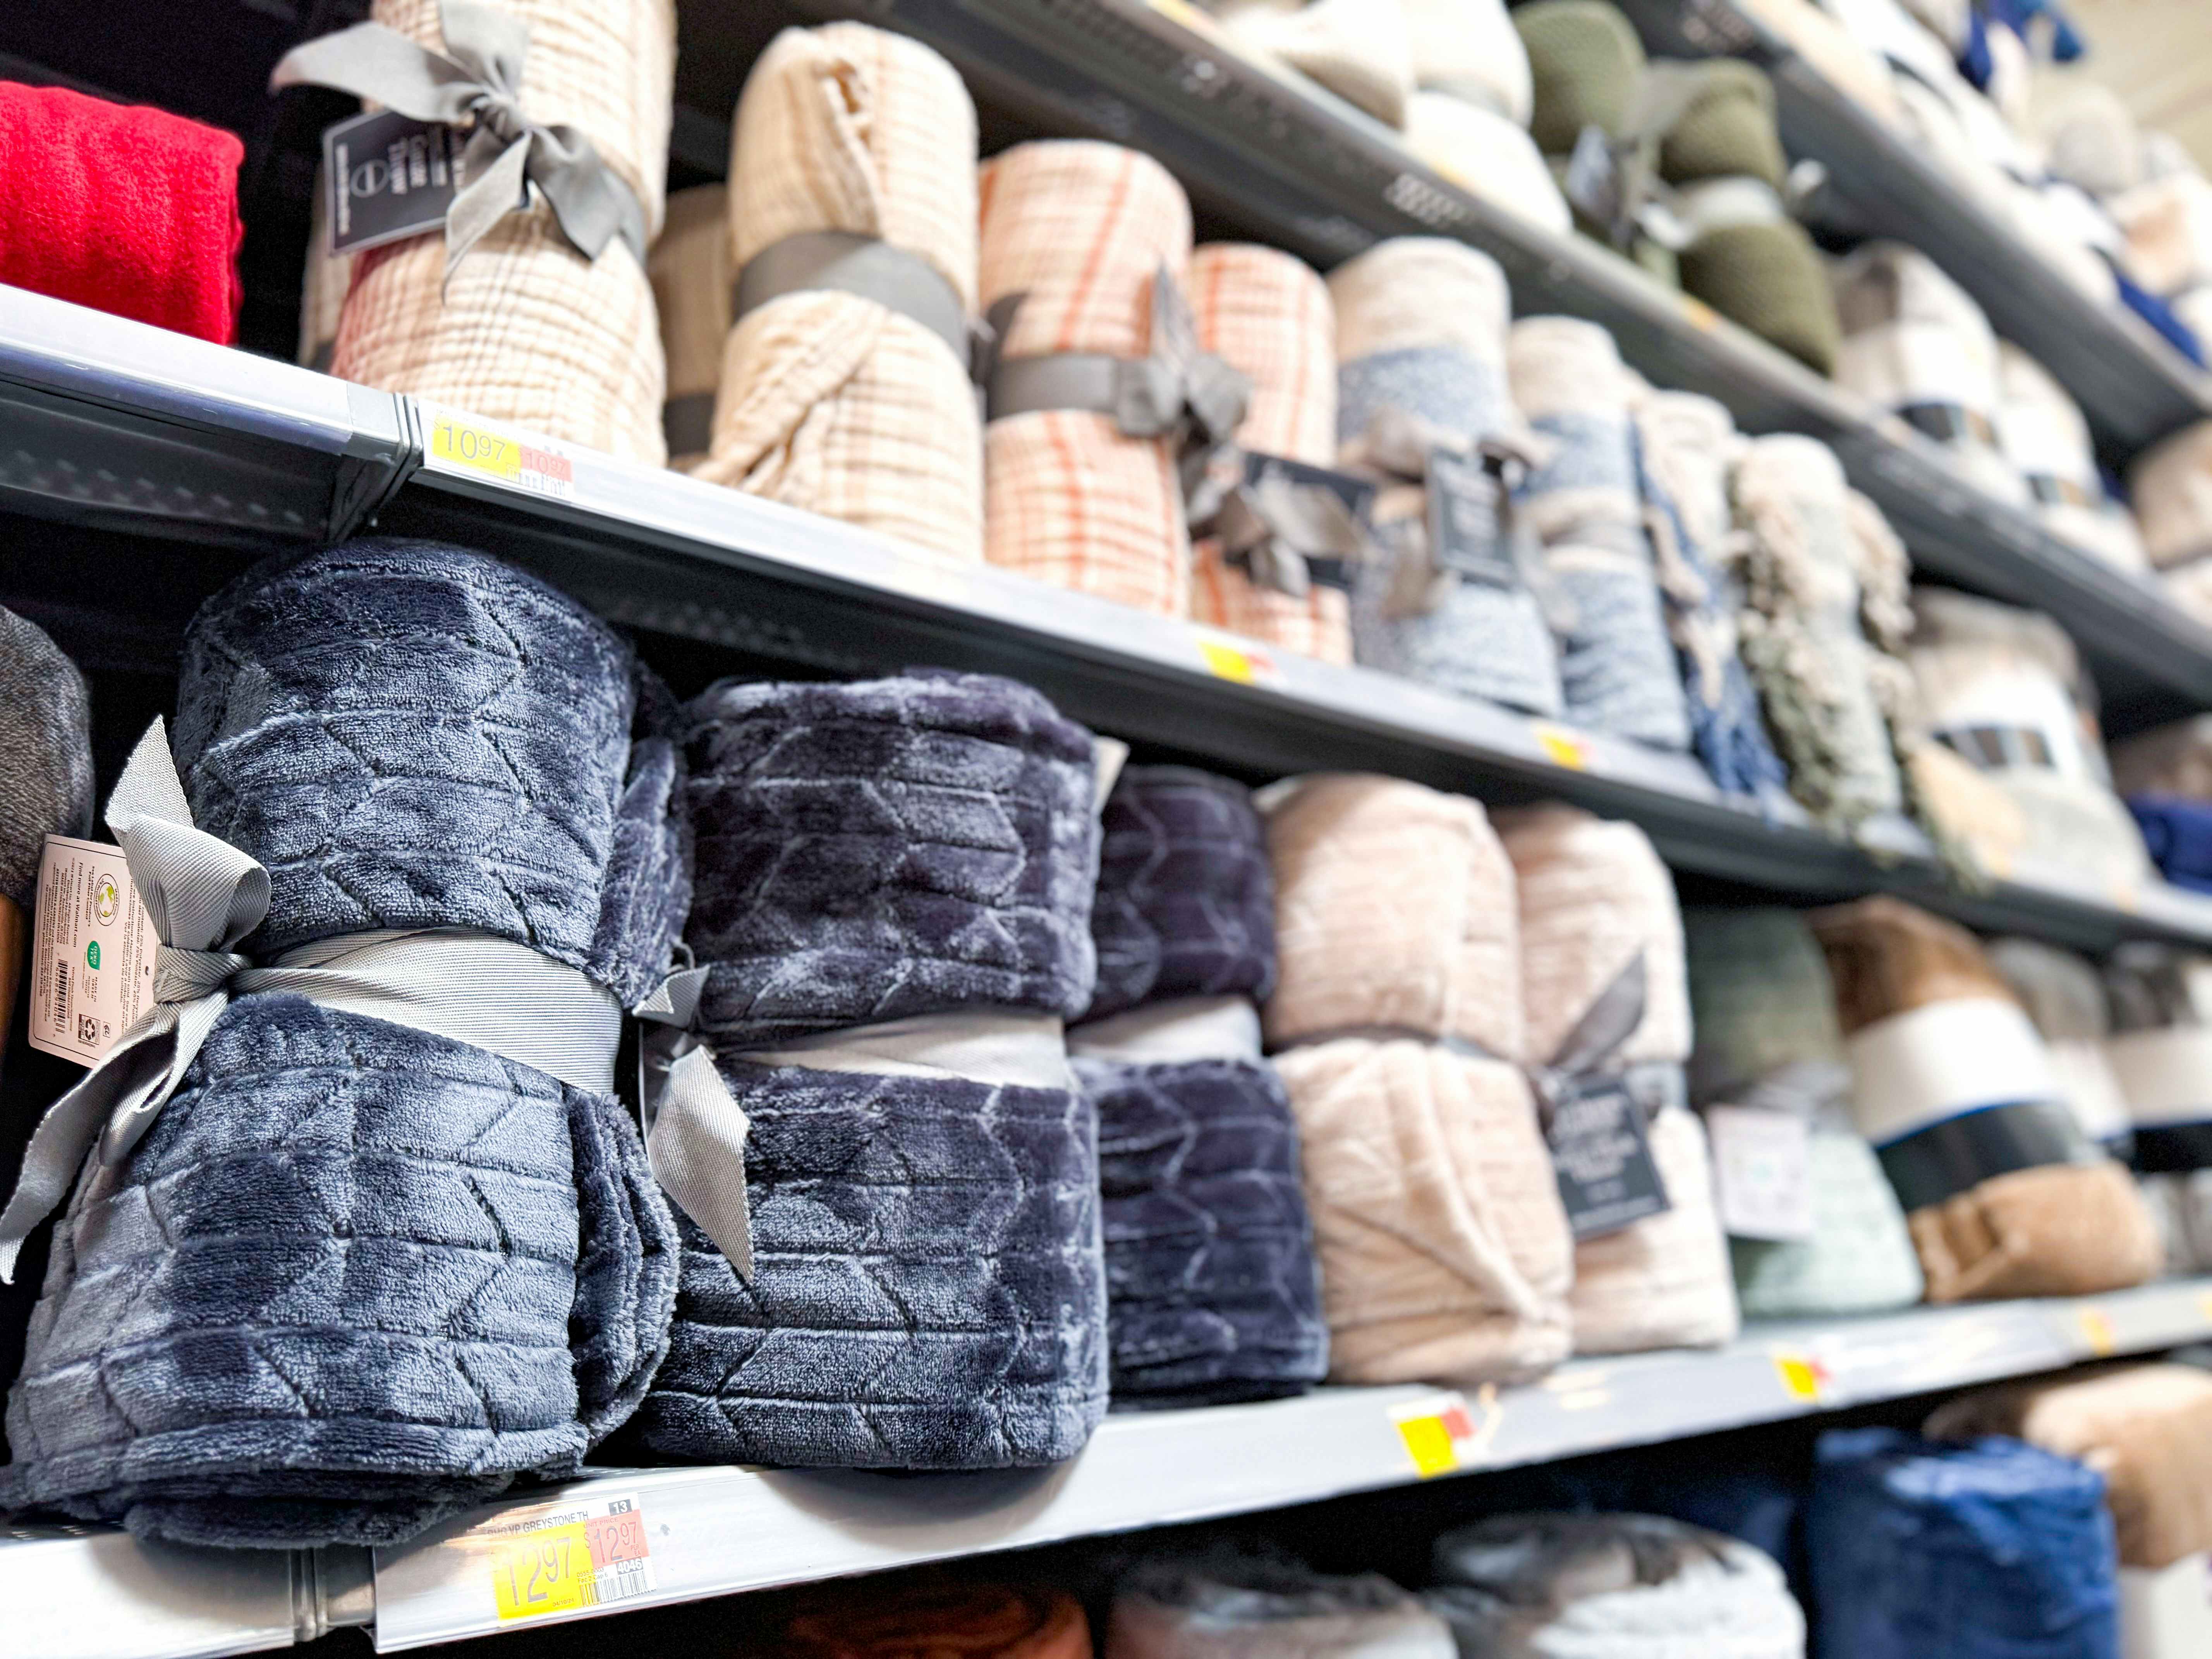 Huge Throw Blanket Clearance at Walmart: Prices Start at $5.90